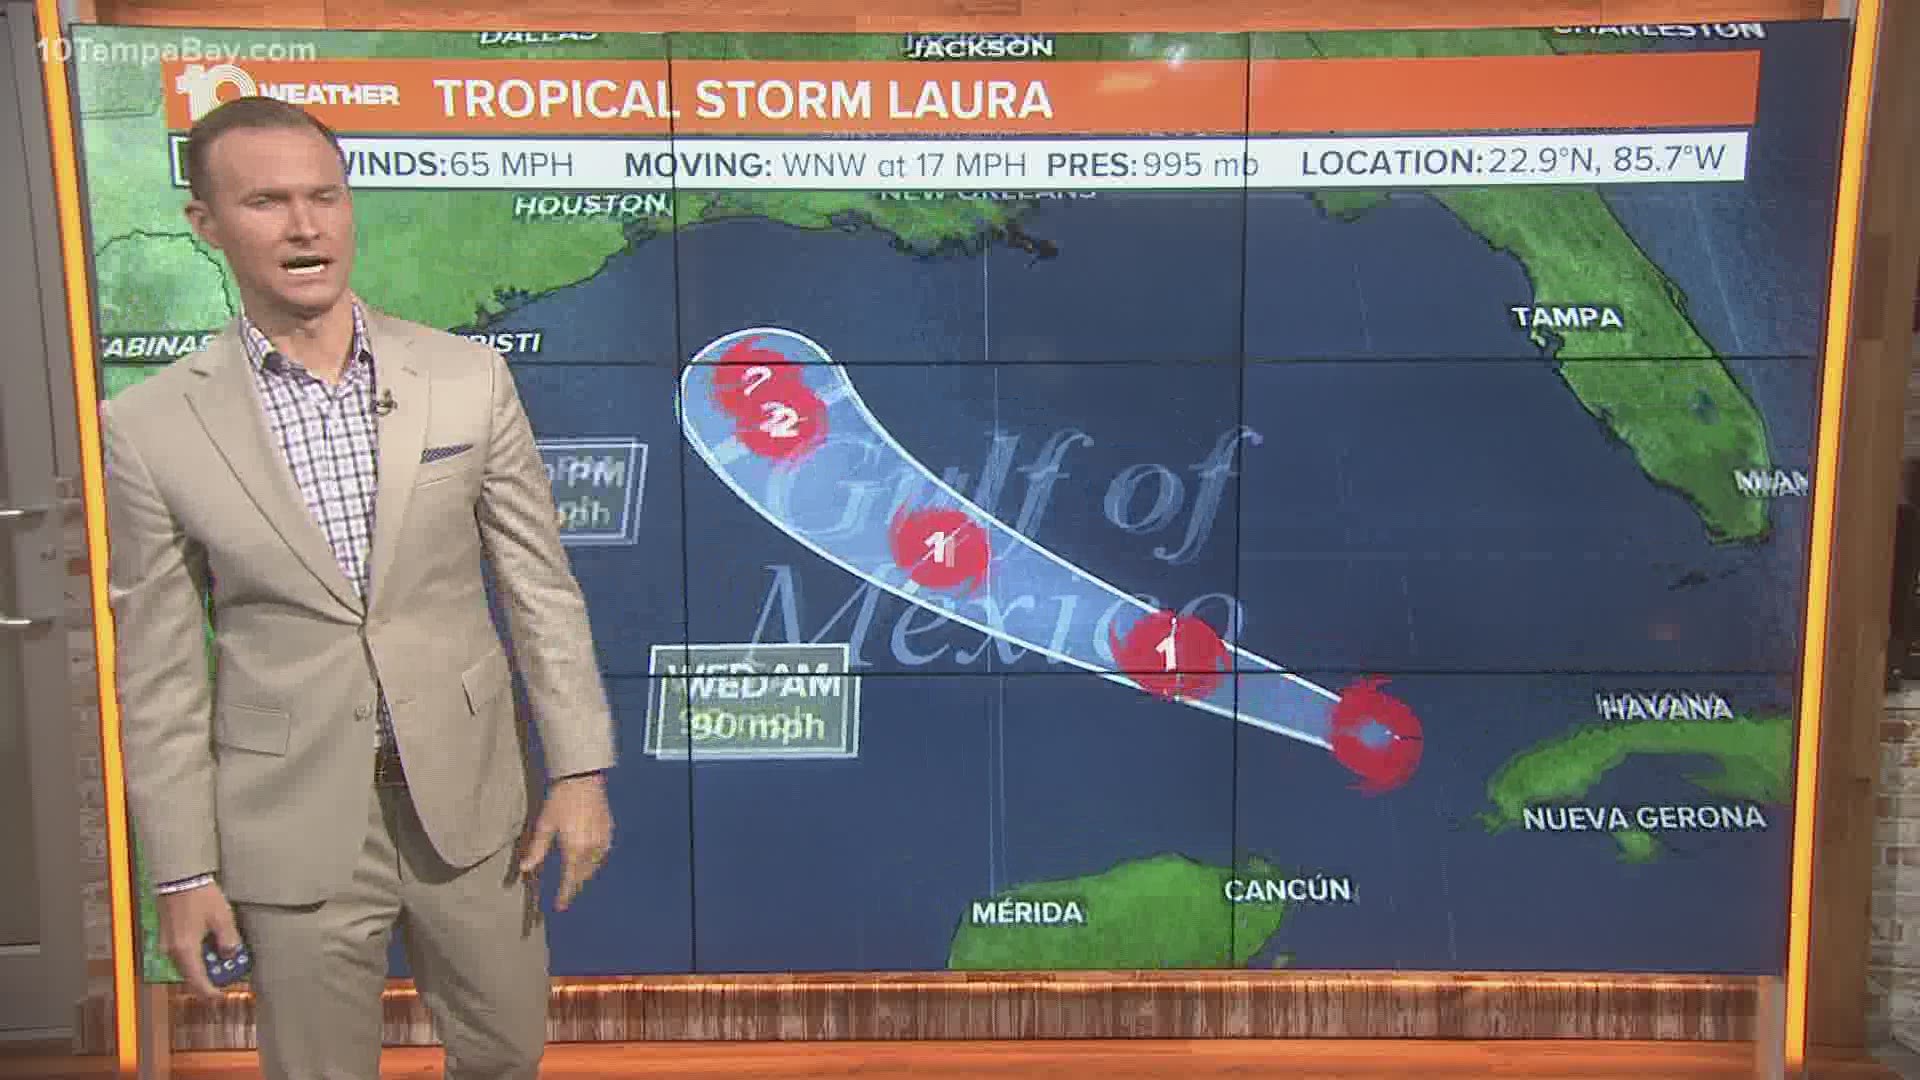 It's possible Laura could undergo a period of rapid intensification as it moves across the Gulf of Mexico.